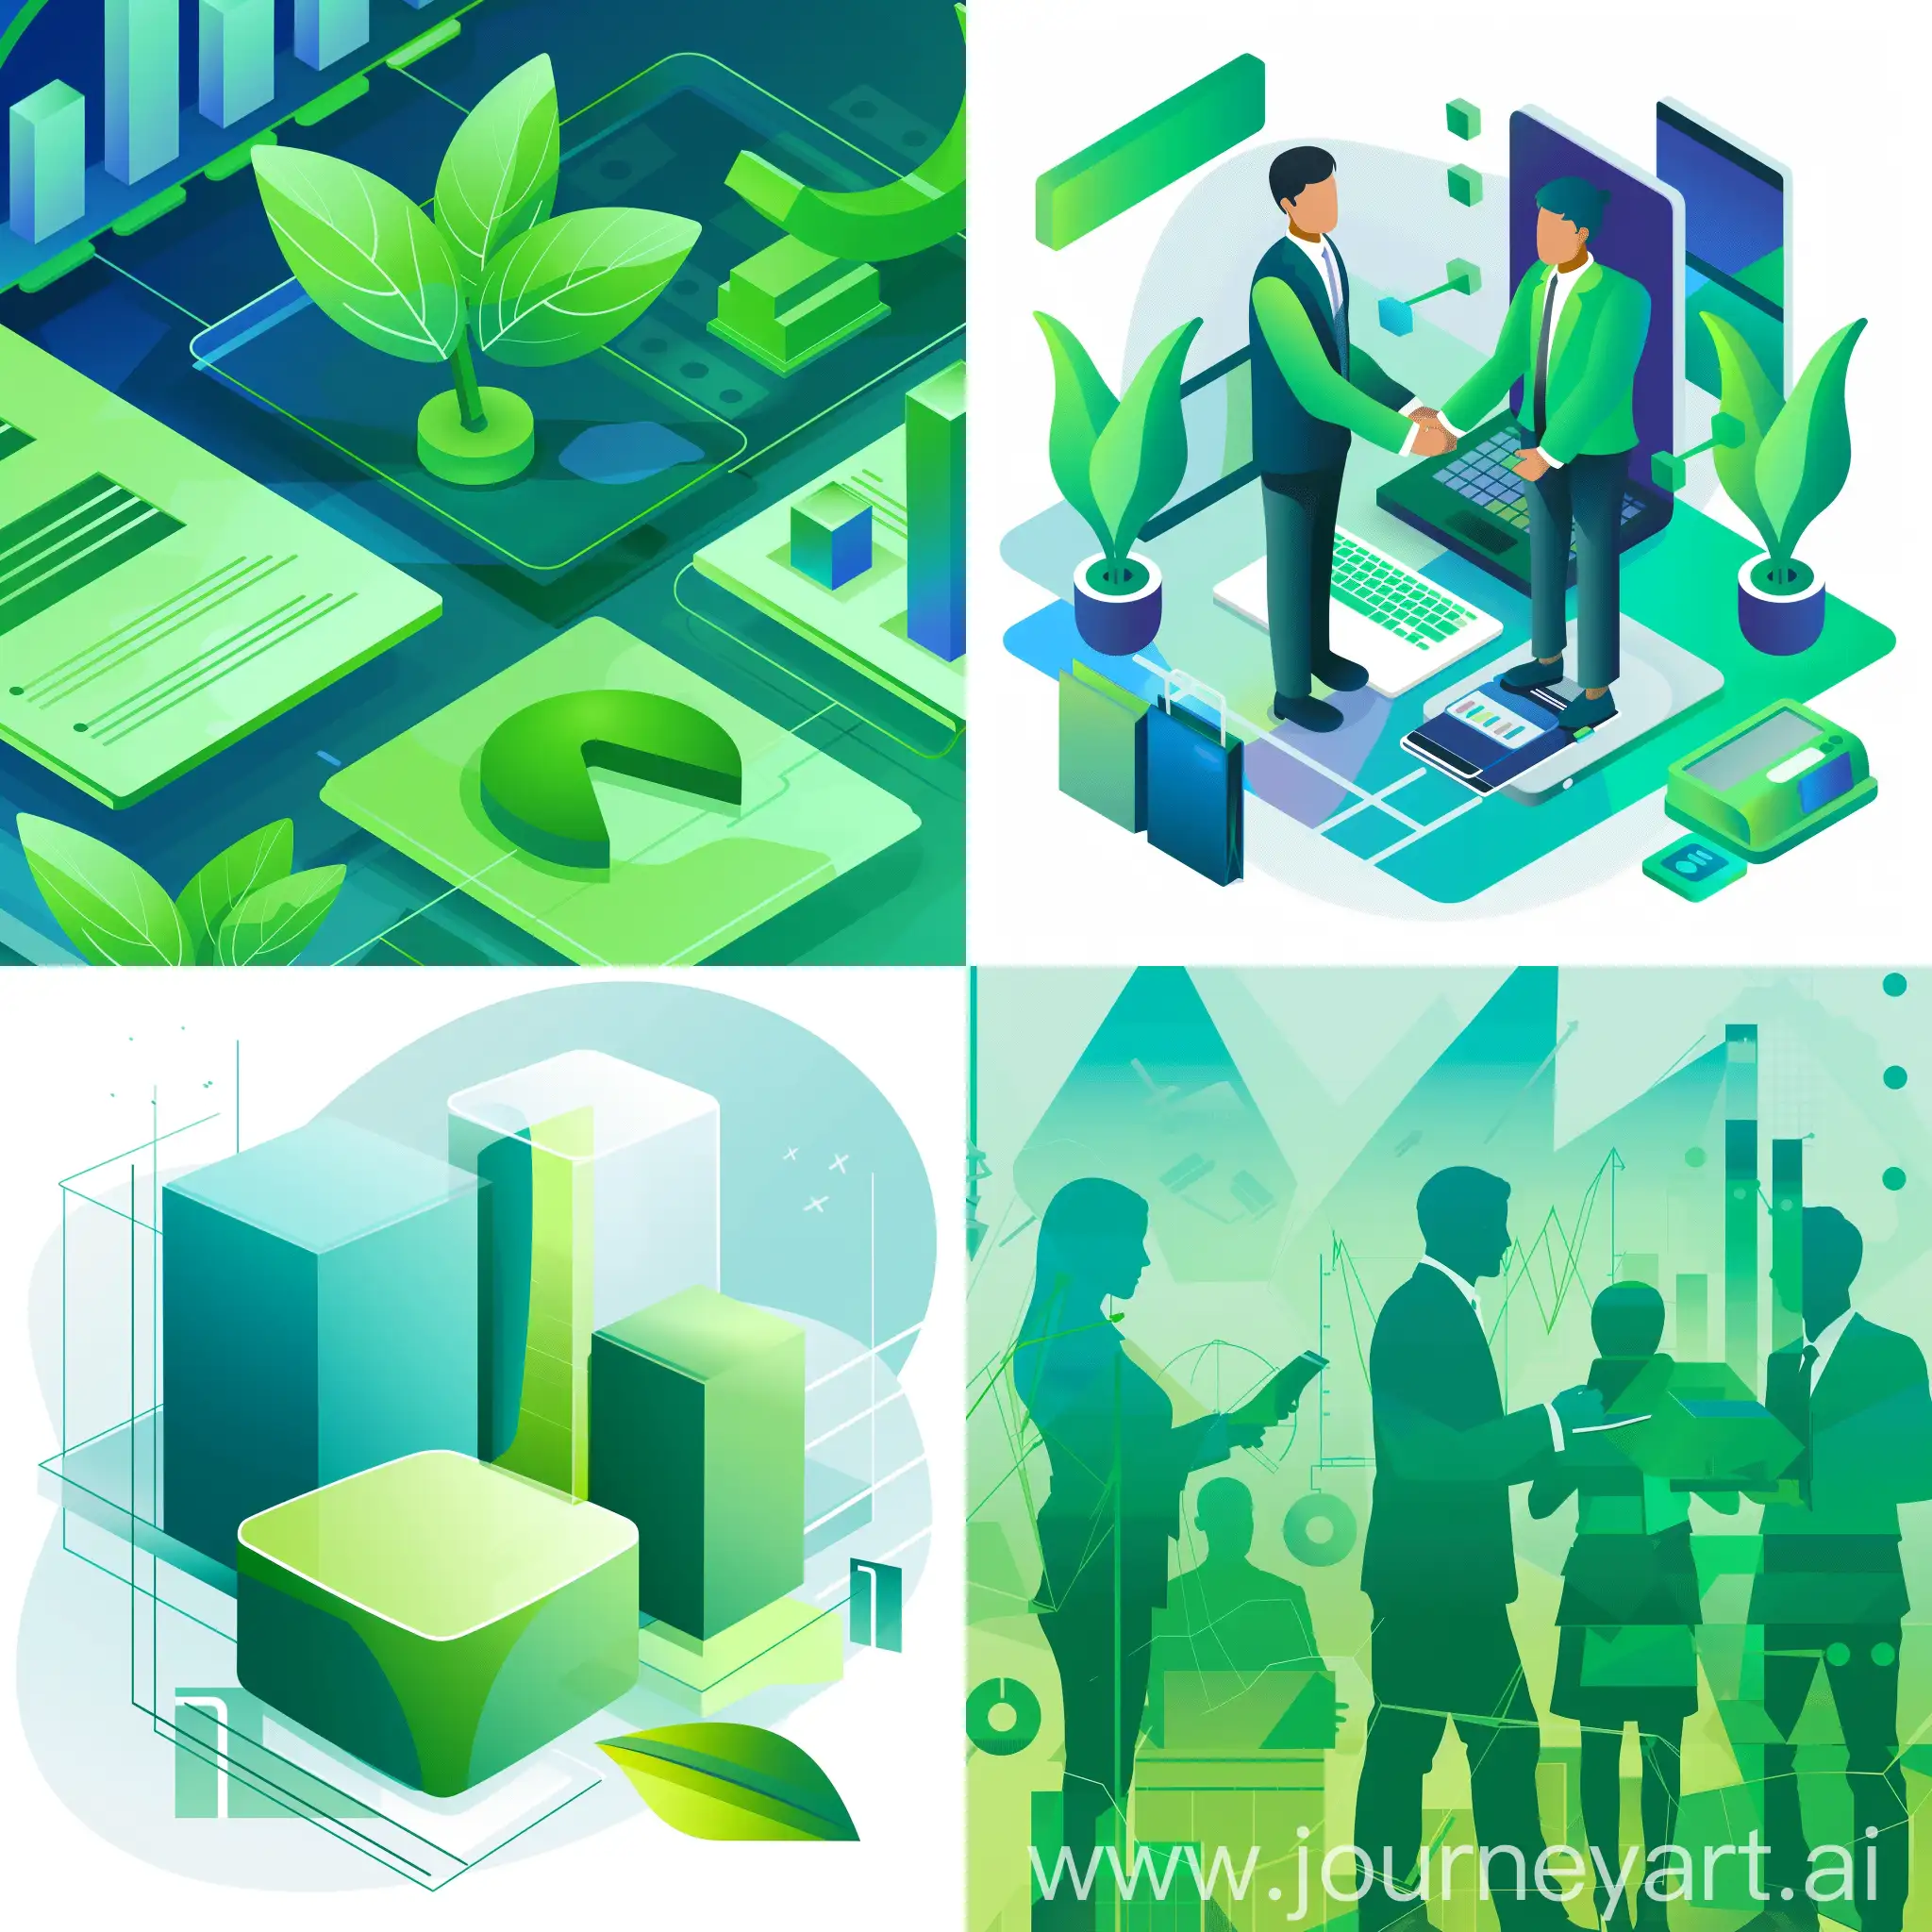 Consultancy-Sales-Strategy-Meeting-in-Green-and-Blue-Theme